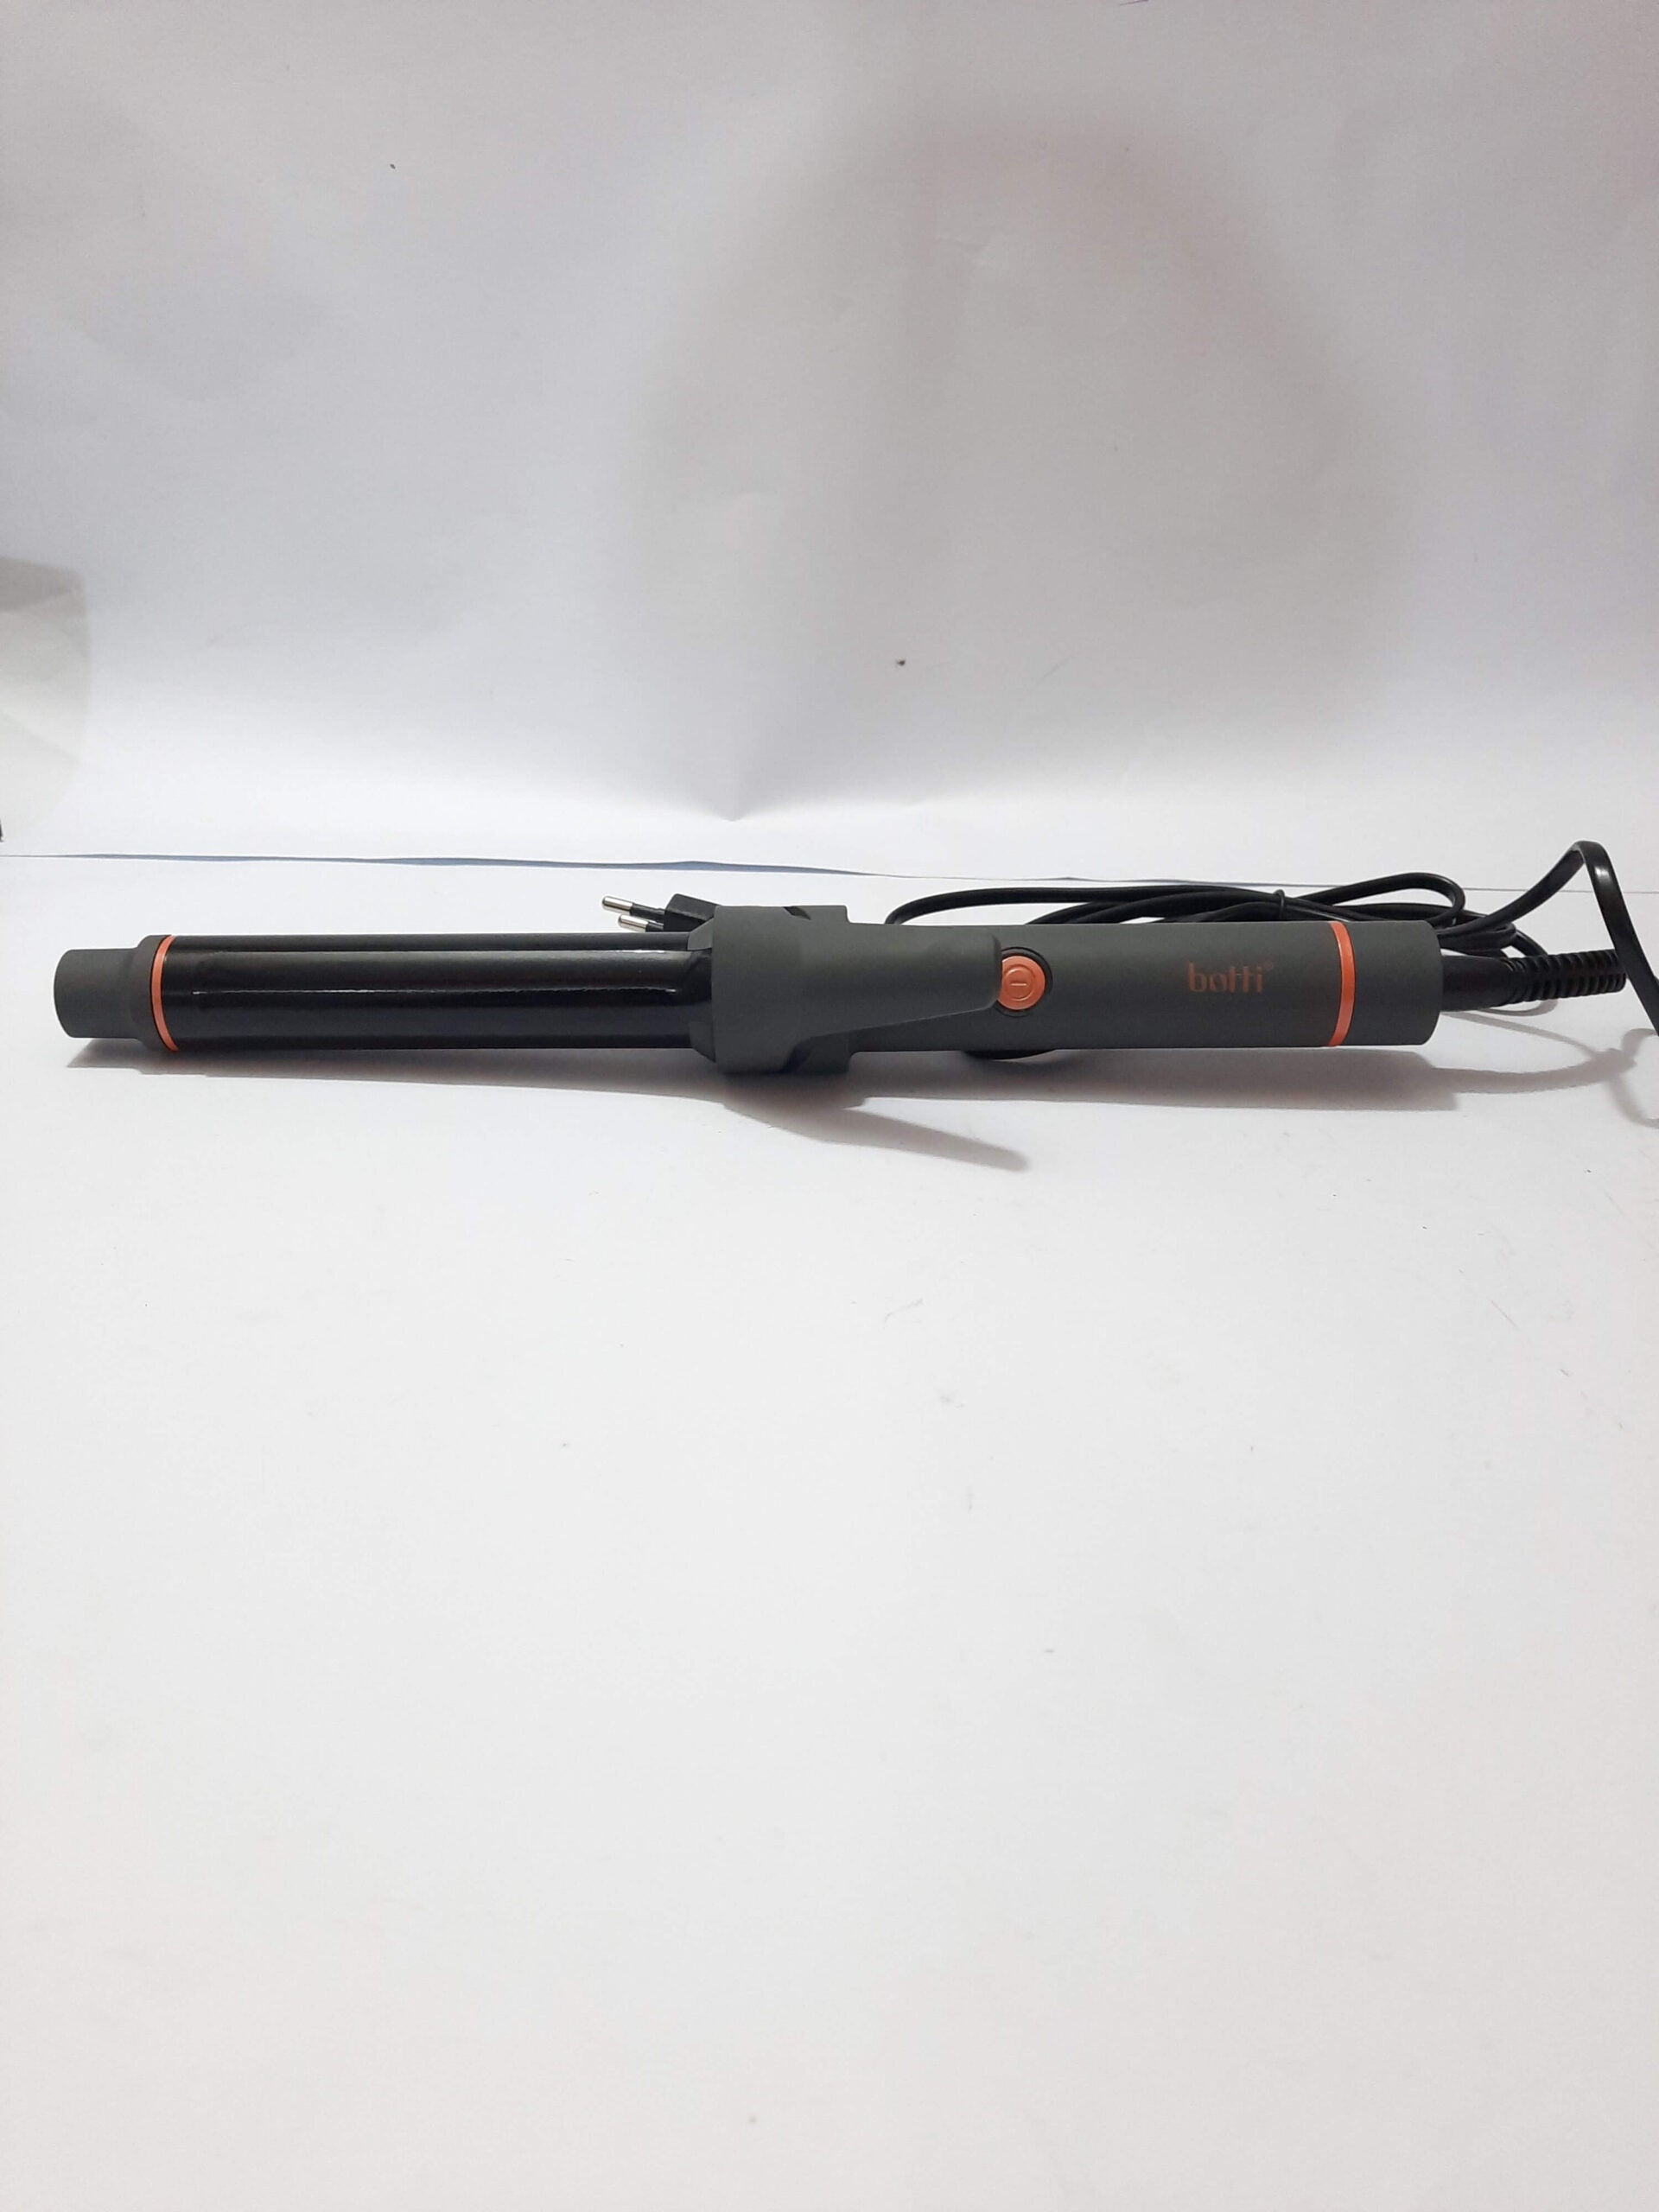 2 in 1 Hair Straightener And Curler